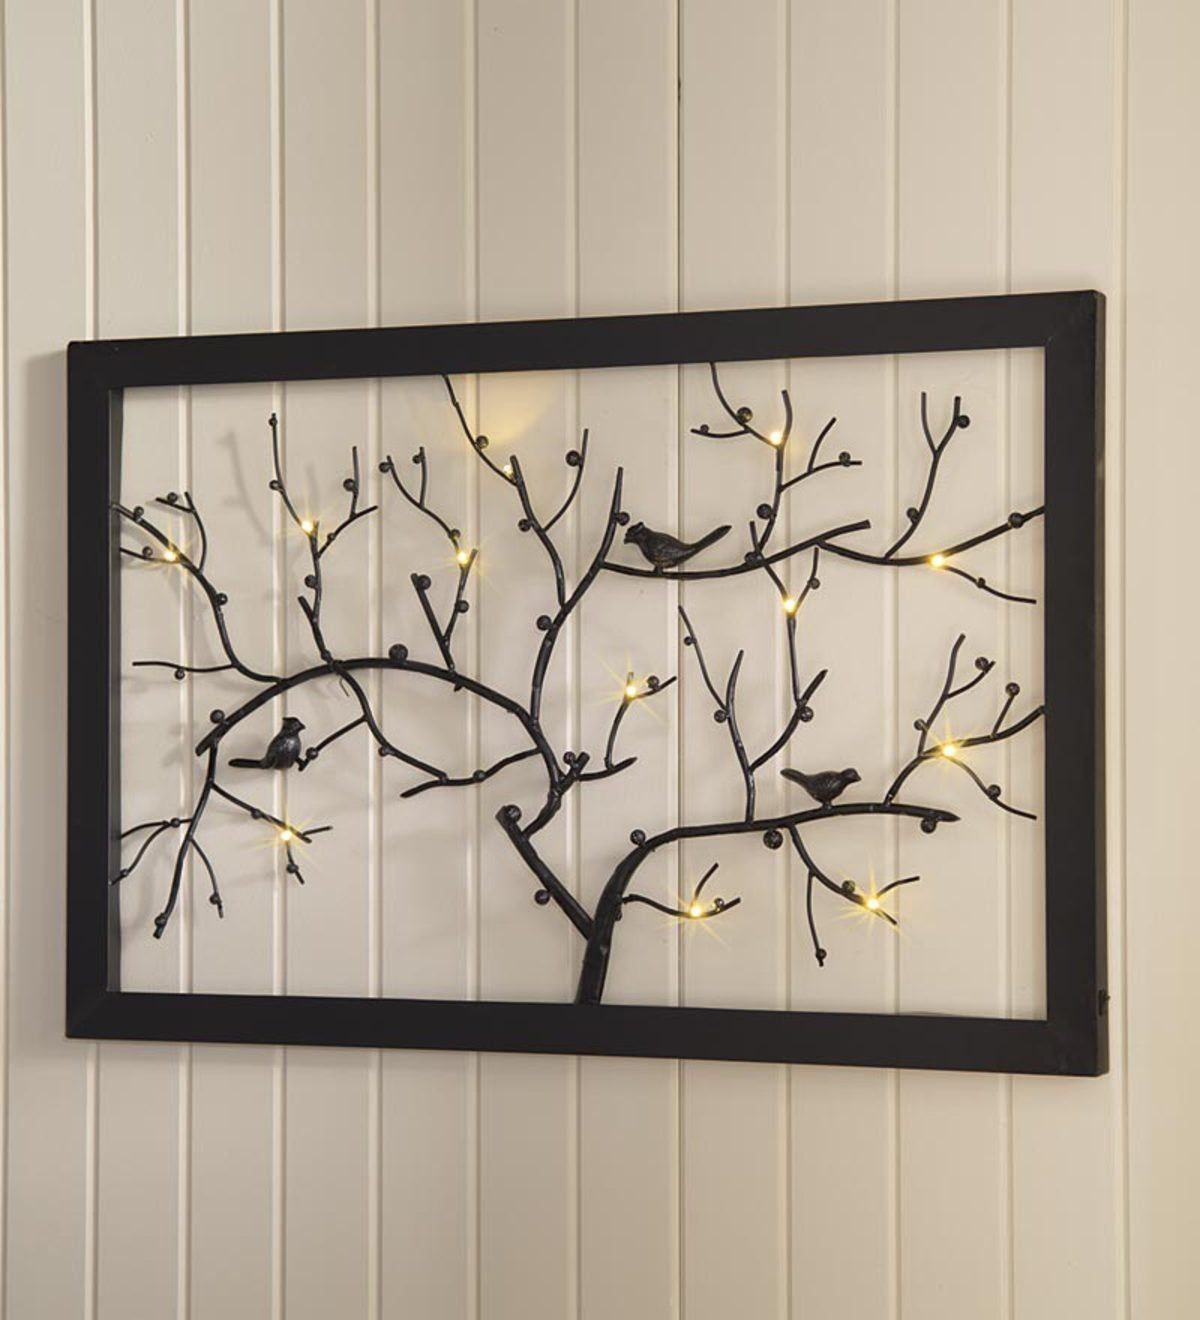 Lighted Bird And Branch Wall Art | Plowhearth For Most Current Bird On Tree Branch Wall Art (Gallery 18 of 20)